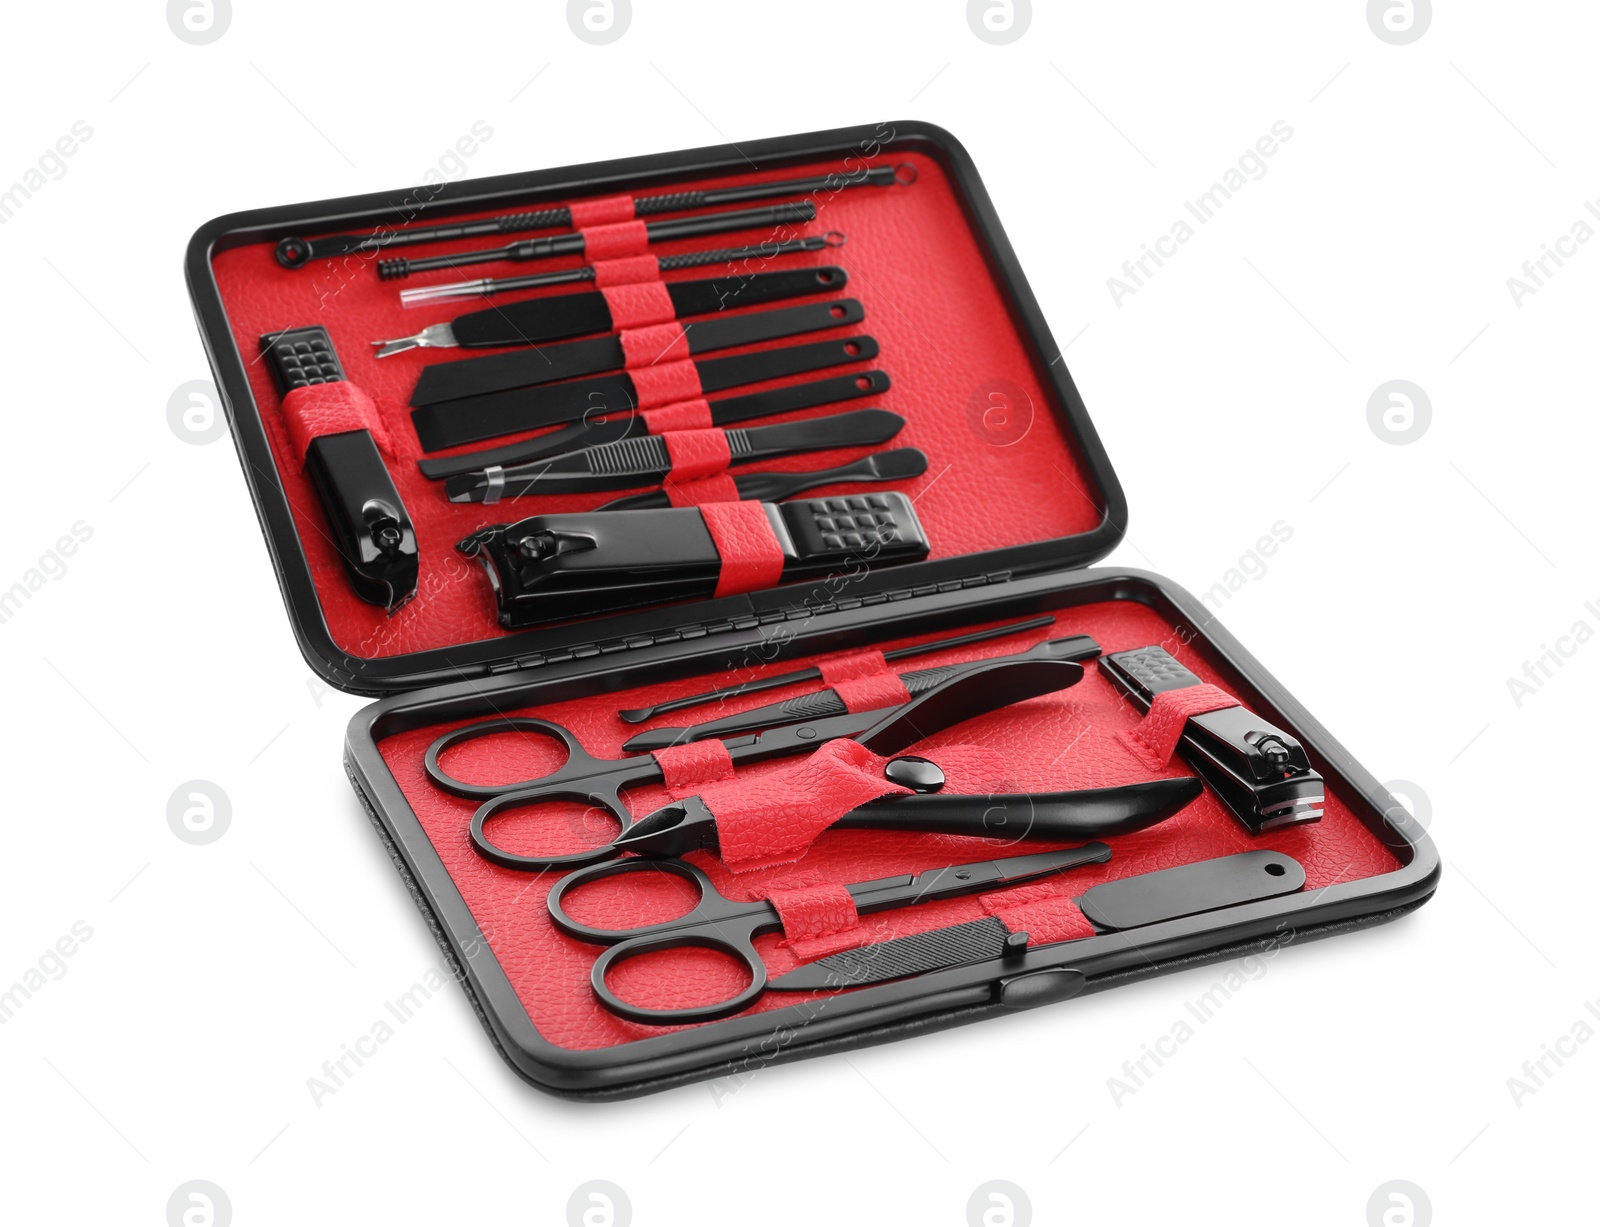 Photo of Manicure set in case isolated on white